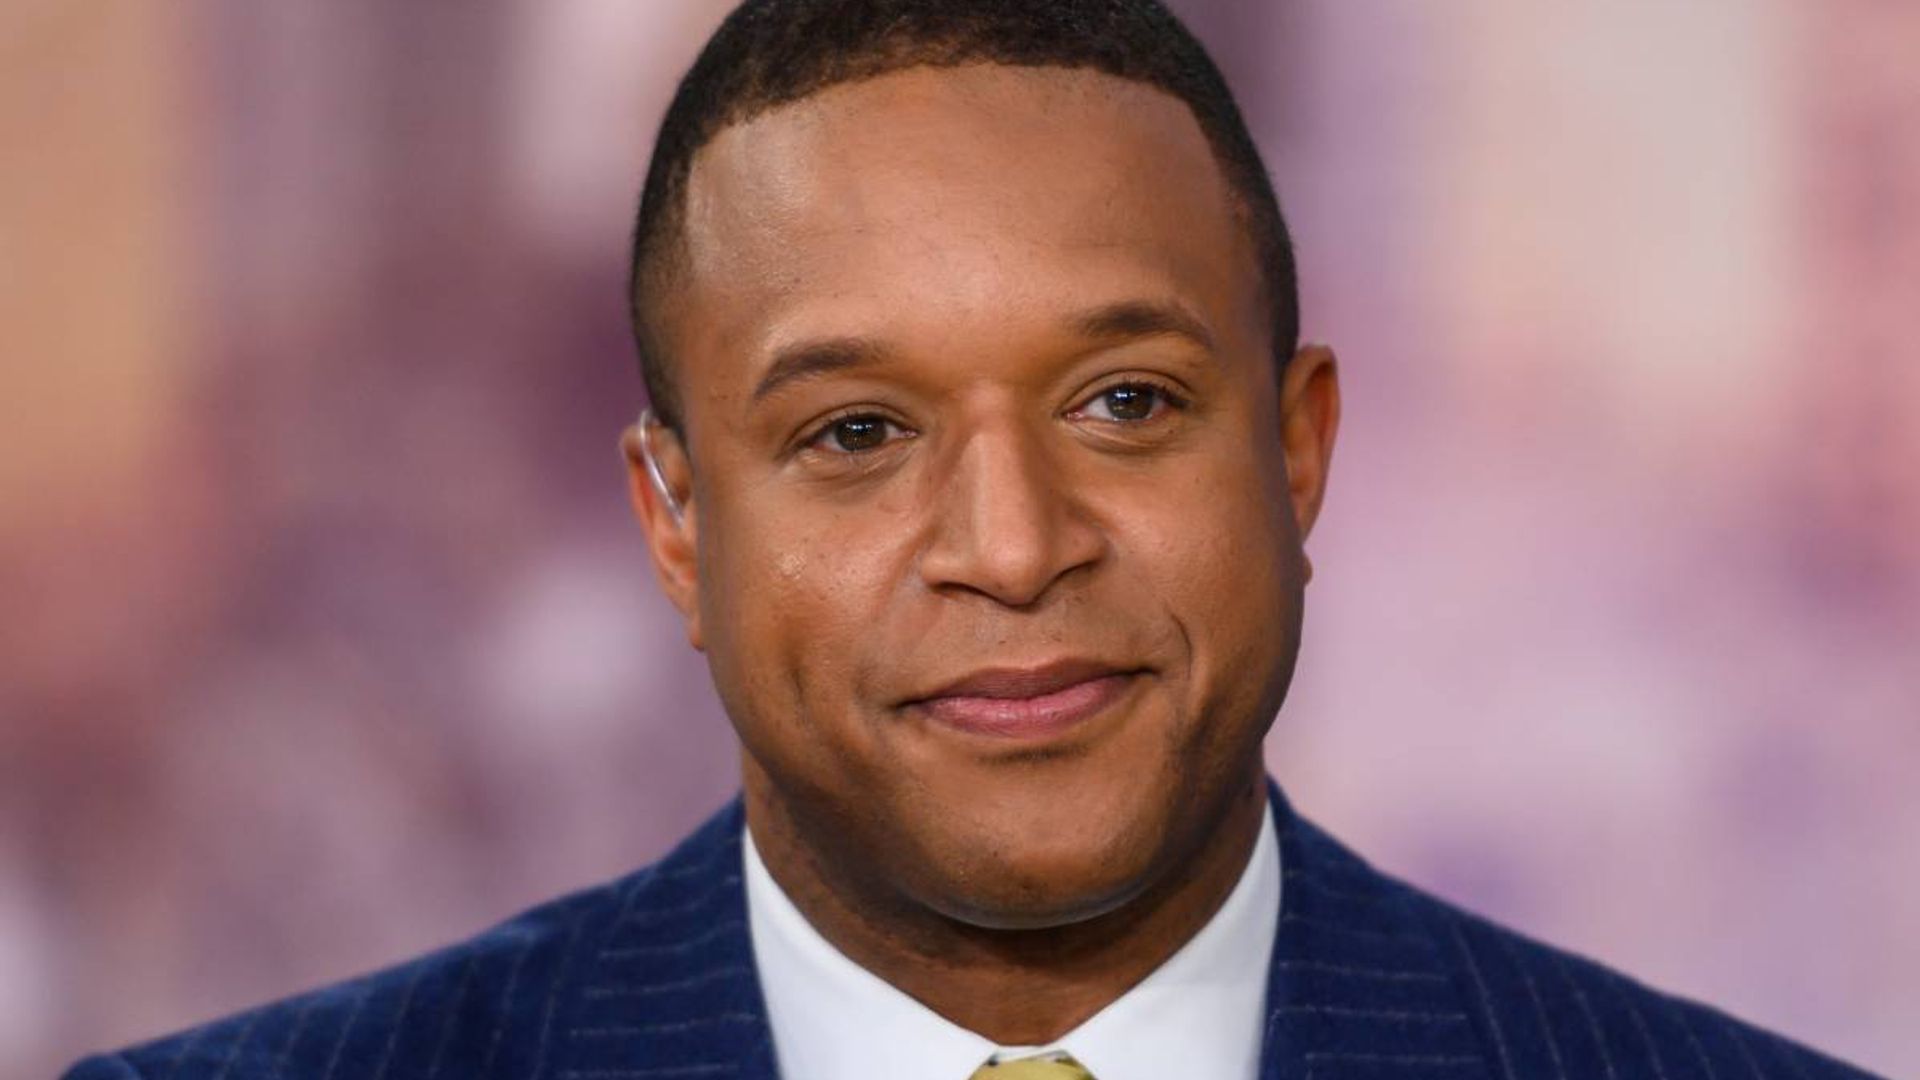 today craig melvin in tears live on air